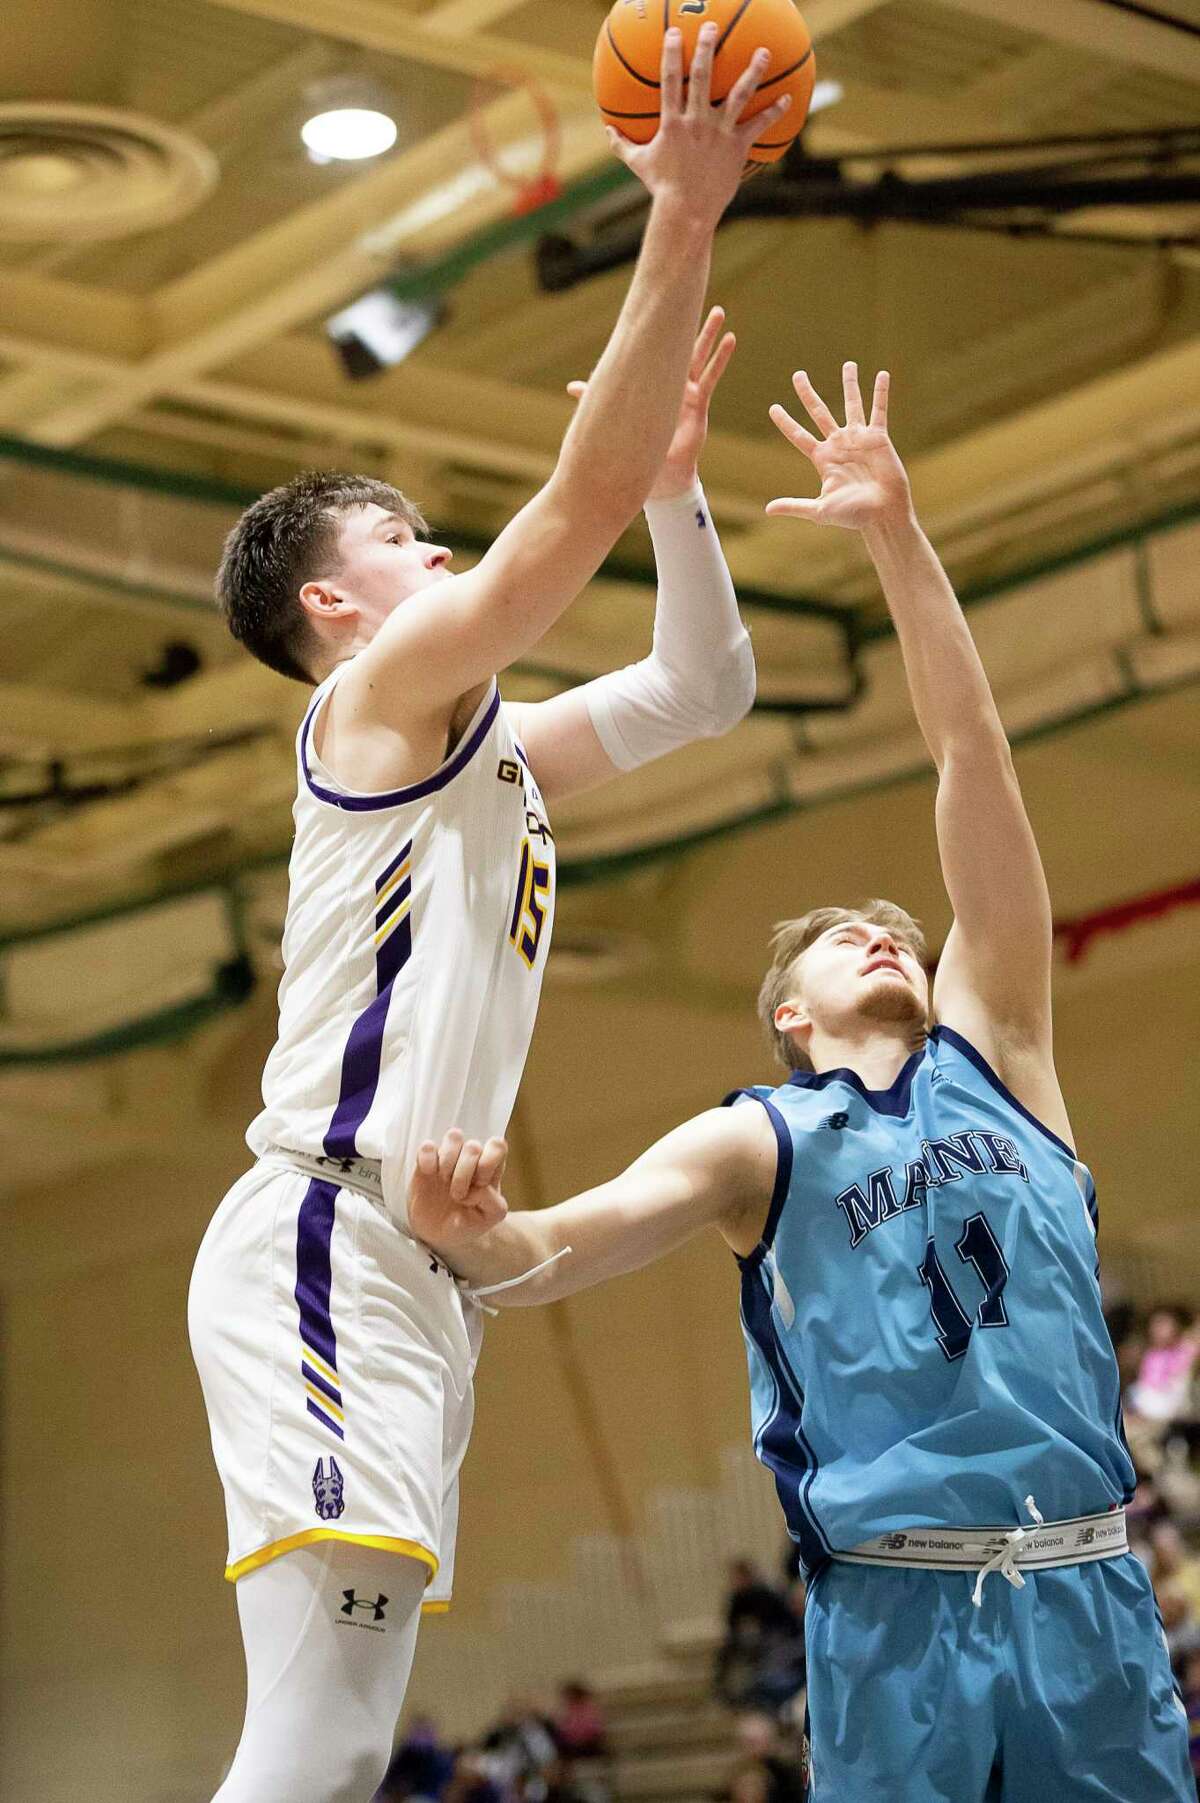 Albany’s Jonathan Beagle shoots the ball above the defending hands of Maine’s Kristians Feierbergs during a game at McDonough Sports Complex in Troy, N.Y. on Saturday, Jan. 28, 2023. (Jenn March, Special to the Times Union)